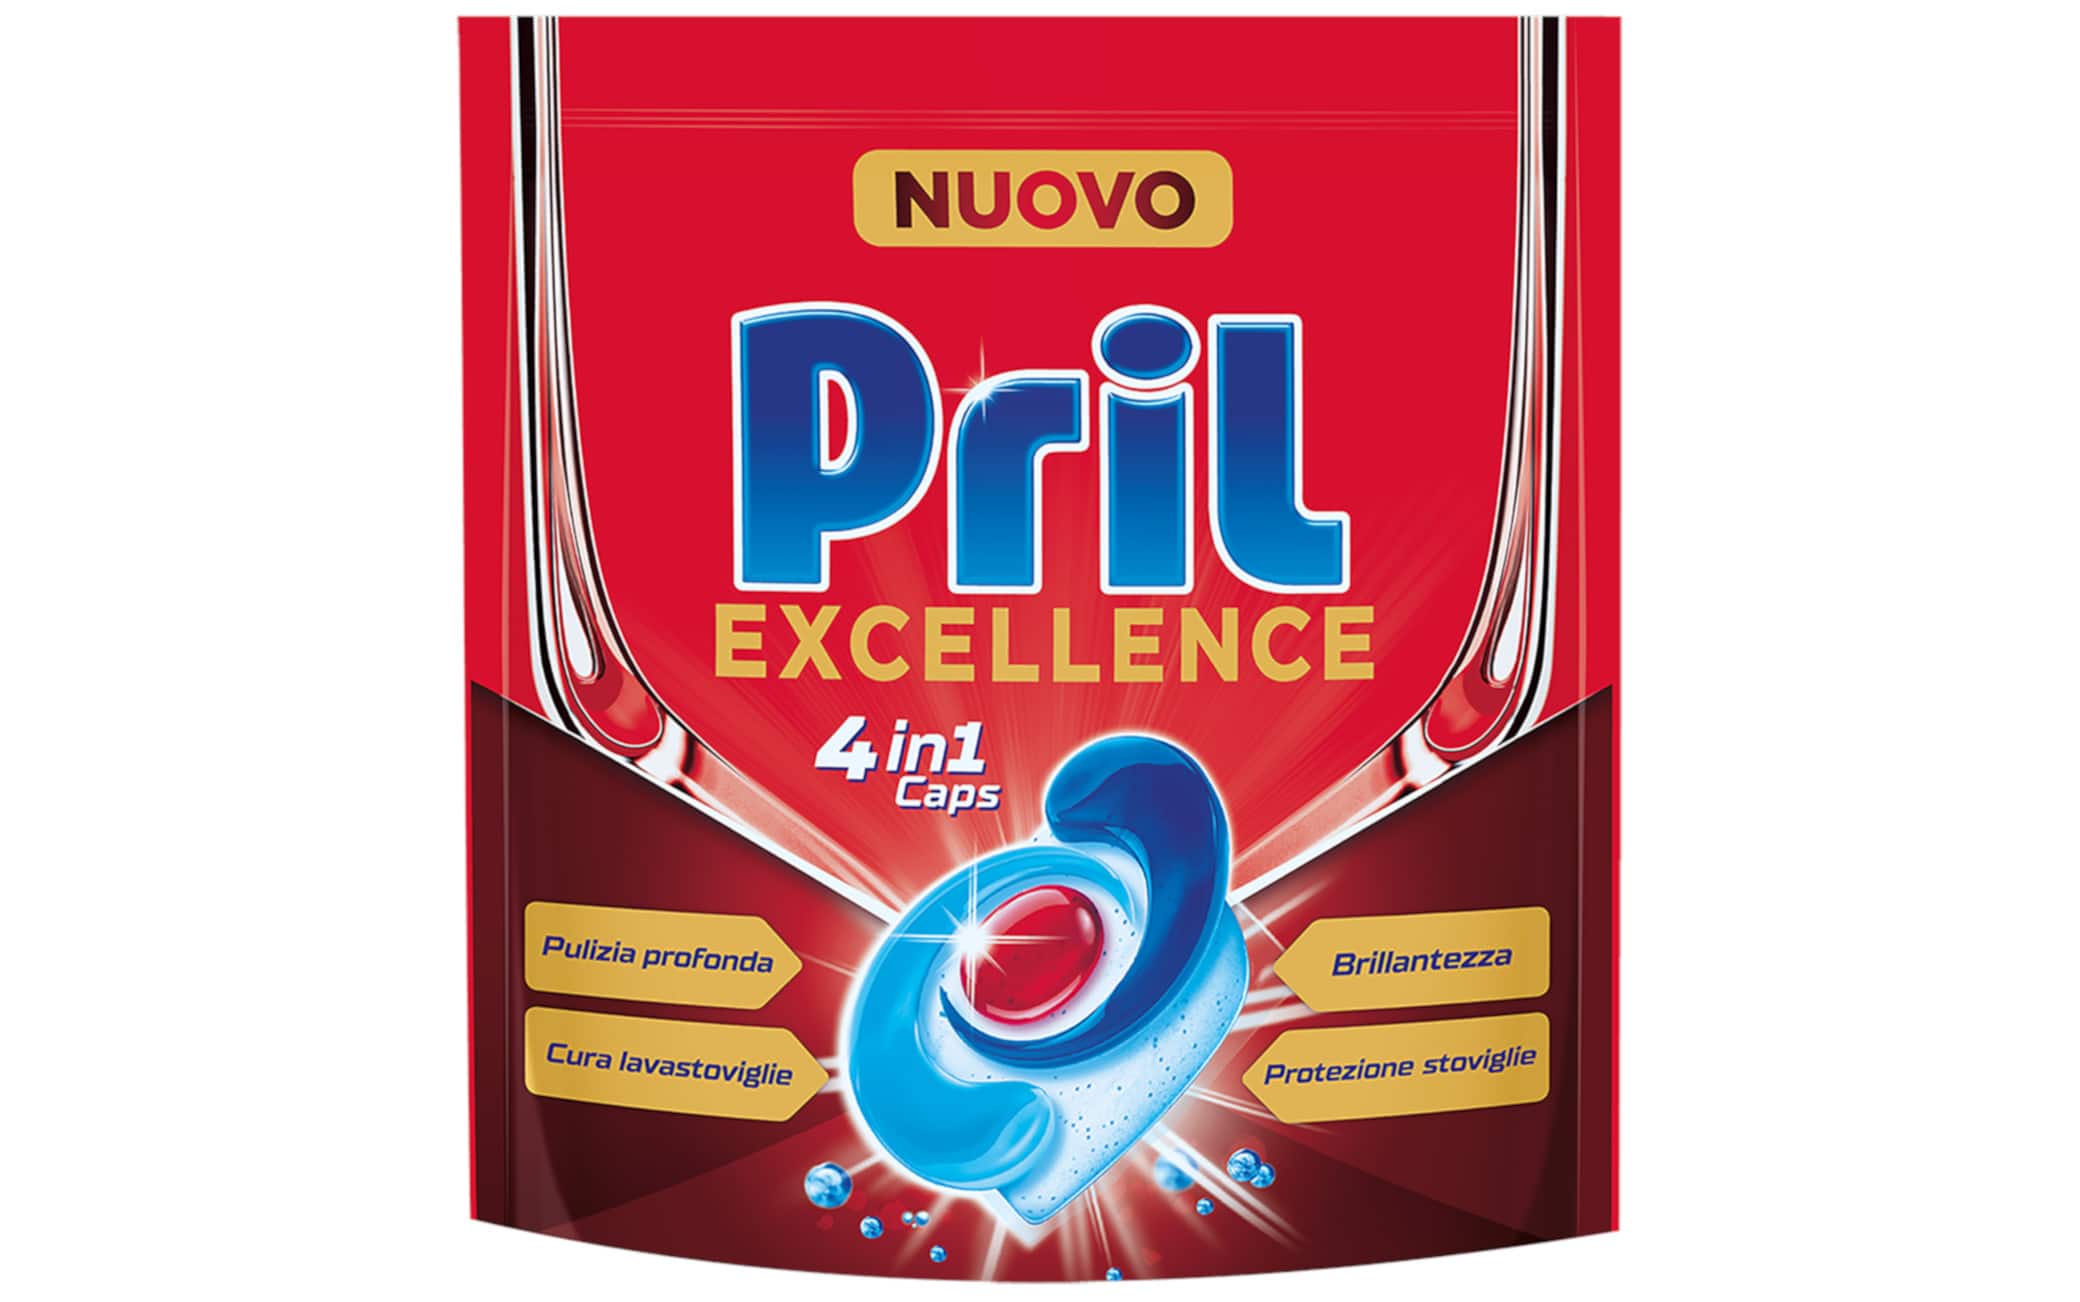 Pril Excellence Caps 4in1 